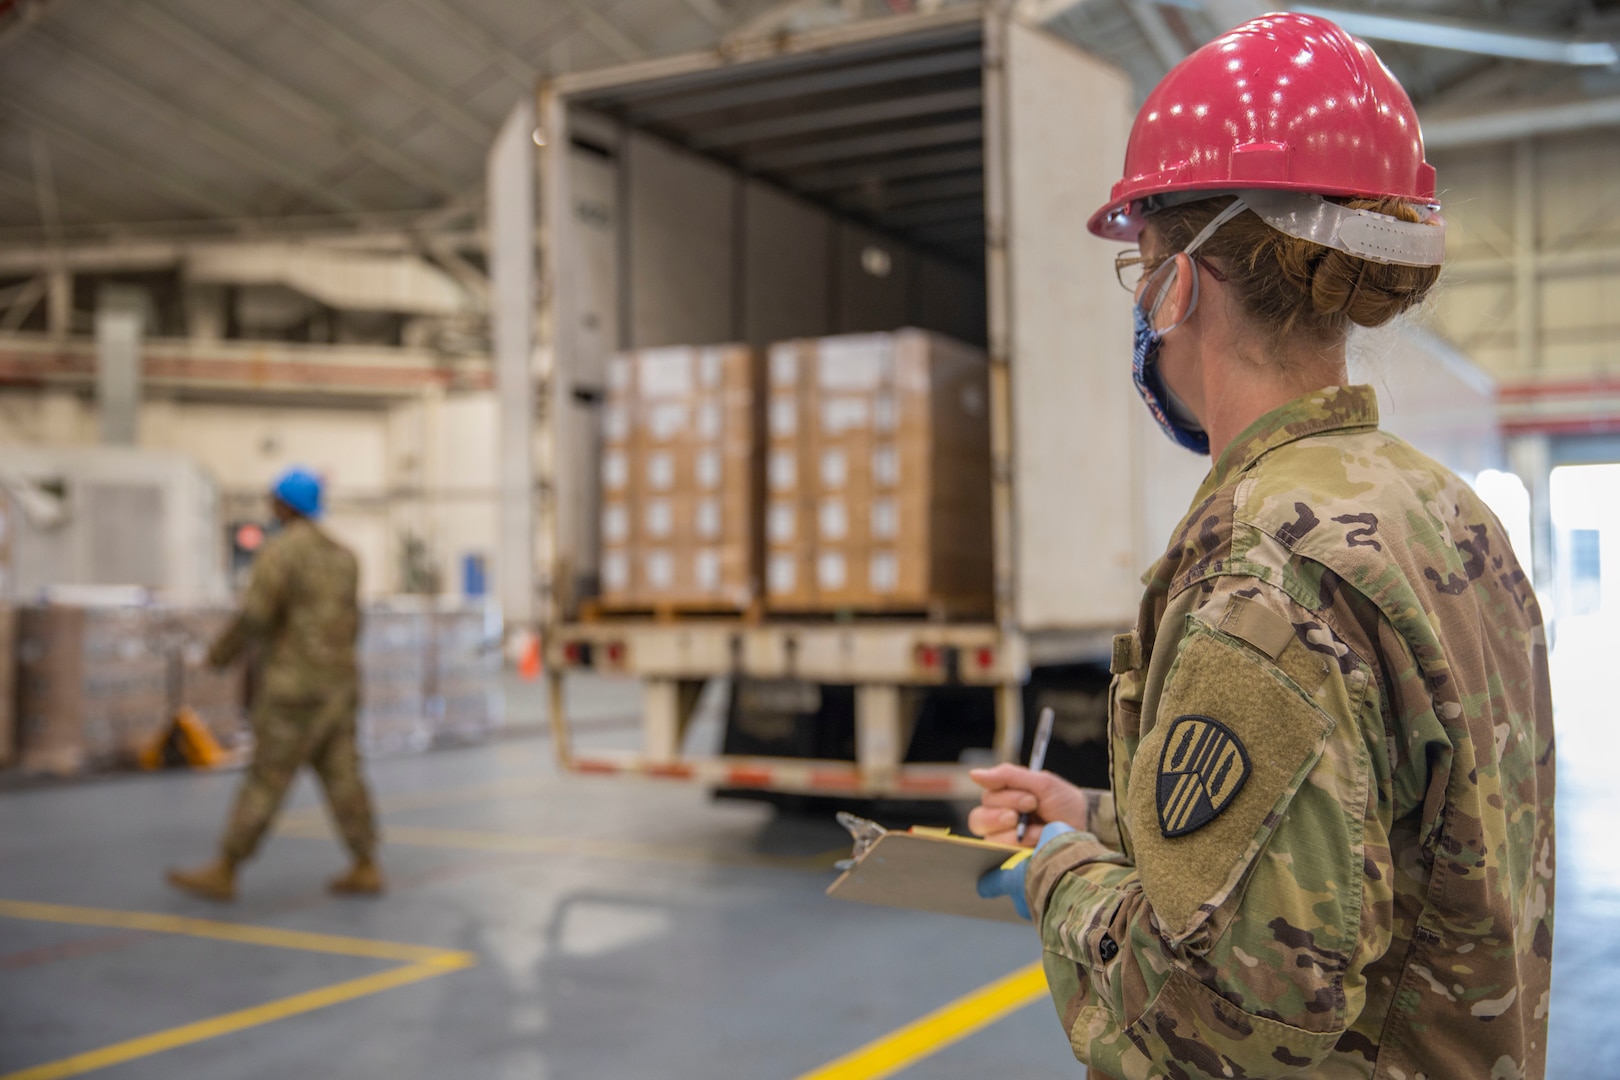 Staff Sgt. Stephanie Kimball assigned to the 1569th Transportation Company, 369th Sustainment Brigade, New York Army National Guard, documents an incoming supply shipment for the COVID-19 response at Stewart Air National Guard  Base in Newburgh, N.Y., April 14, 2020.